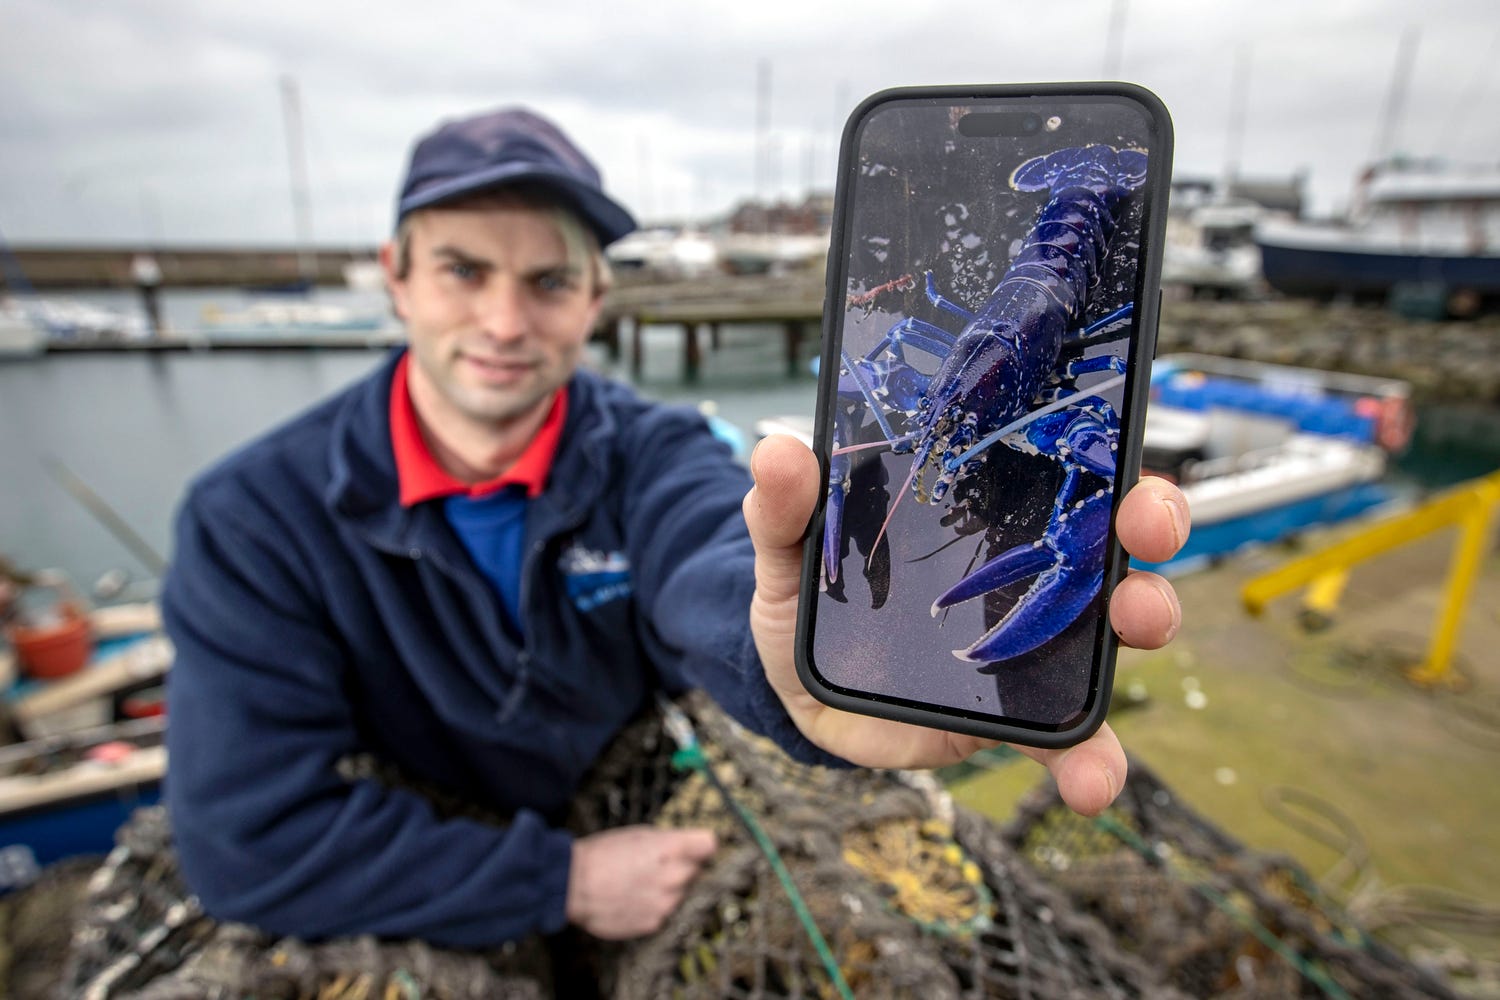 Stuart Brown skipper of the Huntress fishing boat for Seafresh, at Bangor Marina, Northern Ireland, showing an image on a phone of a rare blue lobster he said he found in one of the boat’s pots. PA Photo. Picture date: Monday February 06 2023. See PA story ULSTER Lobster. Photo credit should read: Liam McBurney/PA Wire